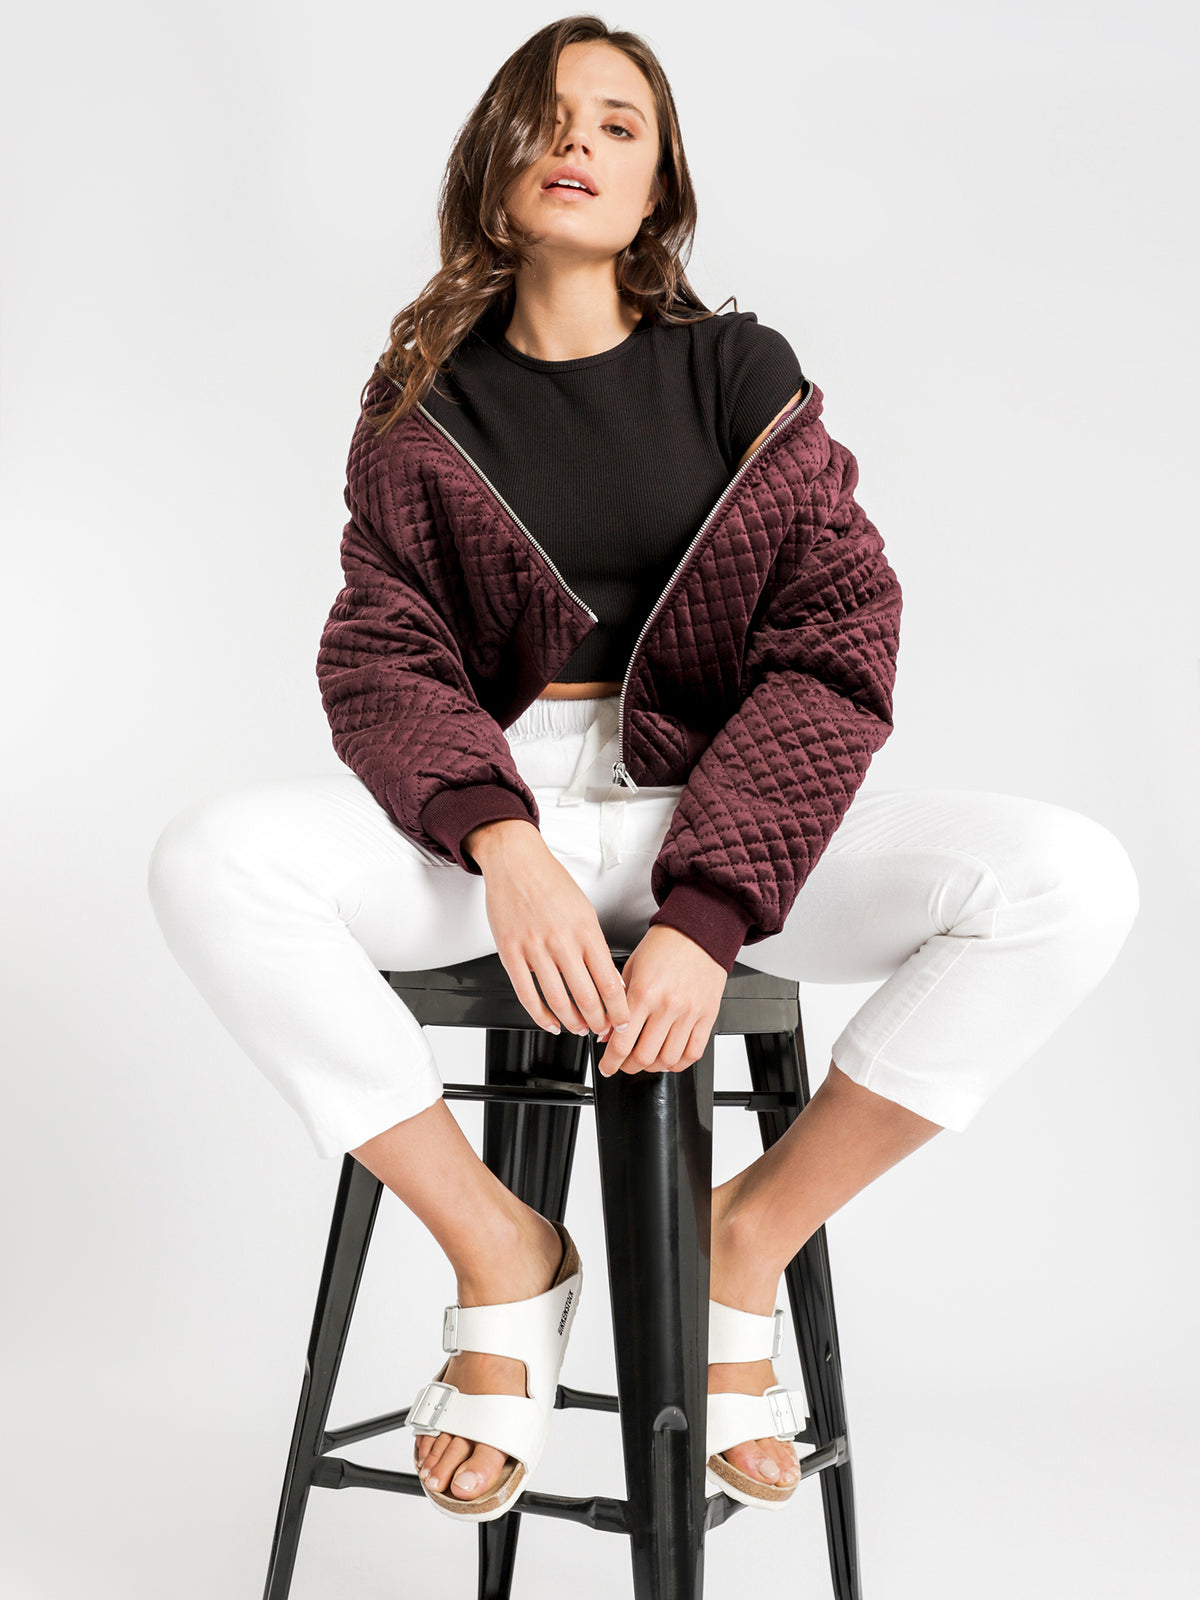 New Frankie Bomber Jacket in Berry